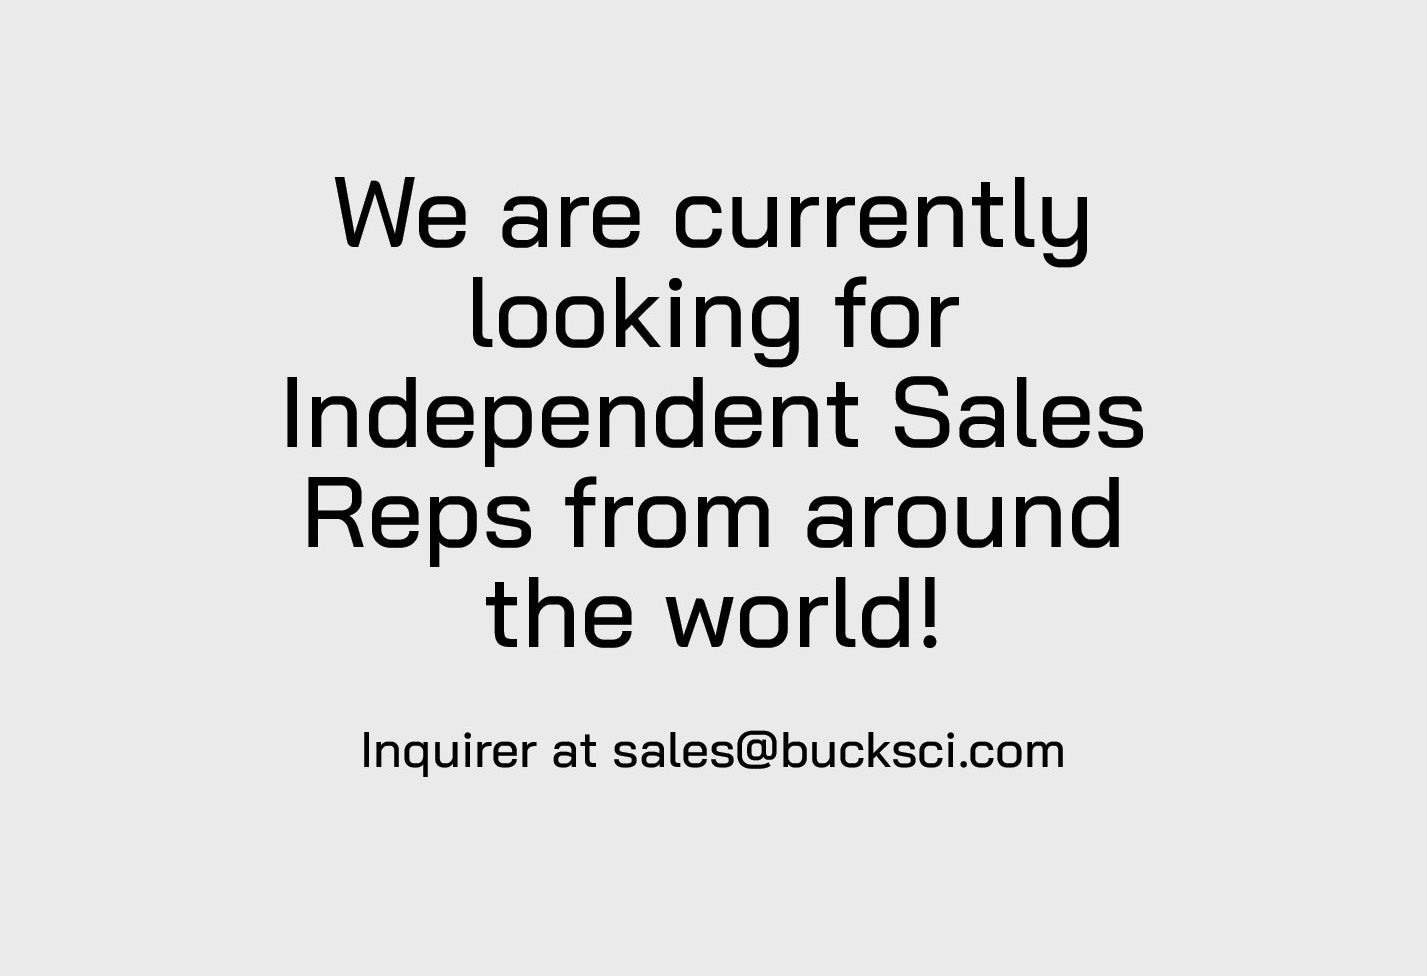 Independent Sales Reps Respond